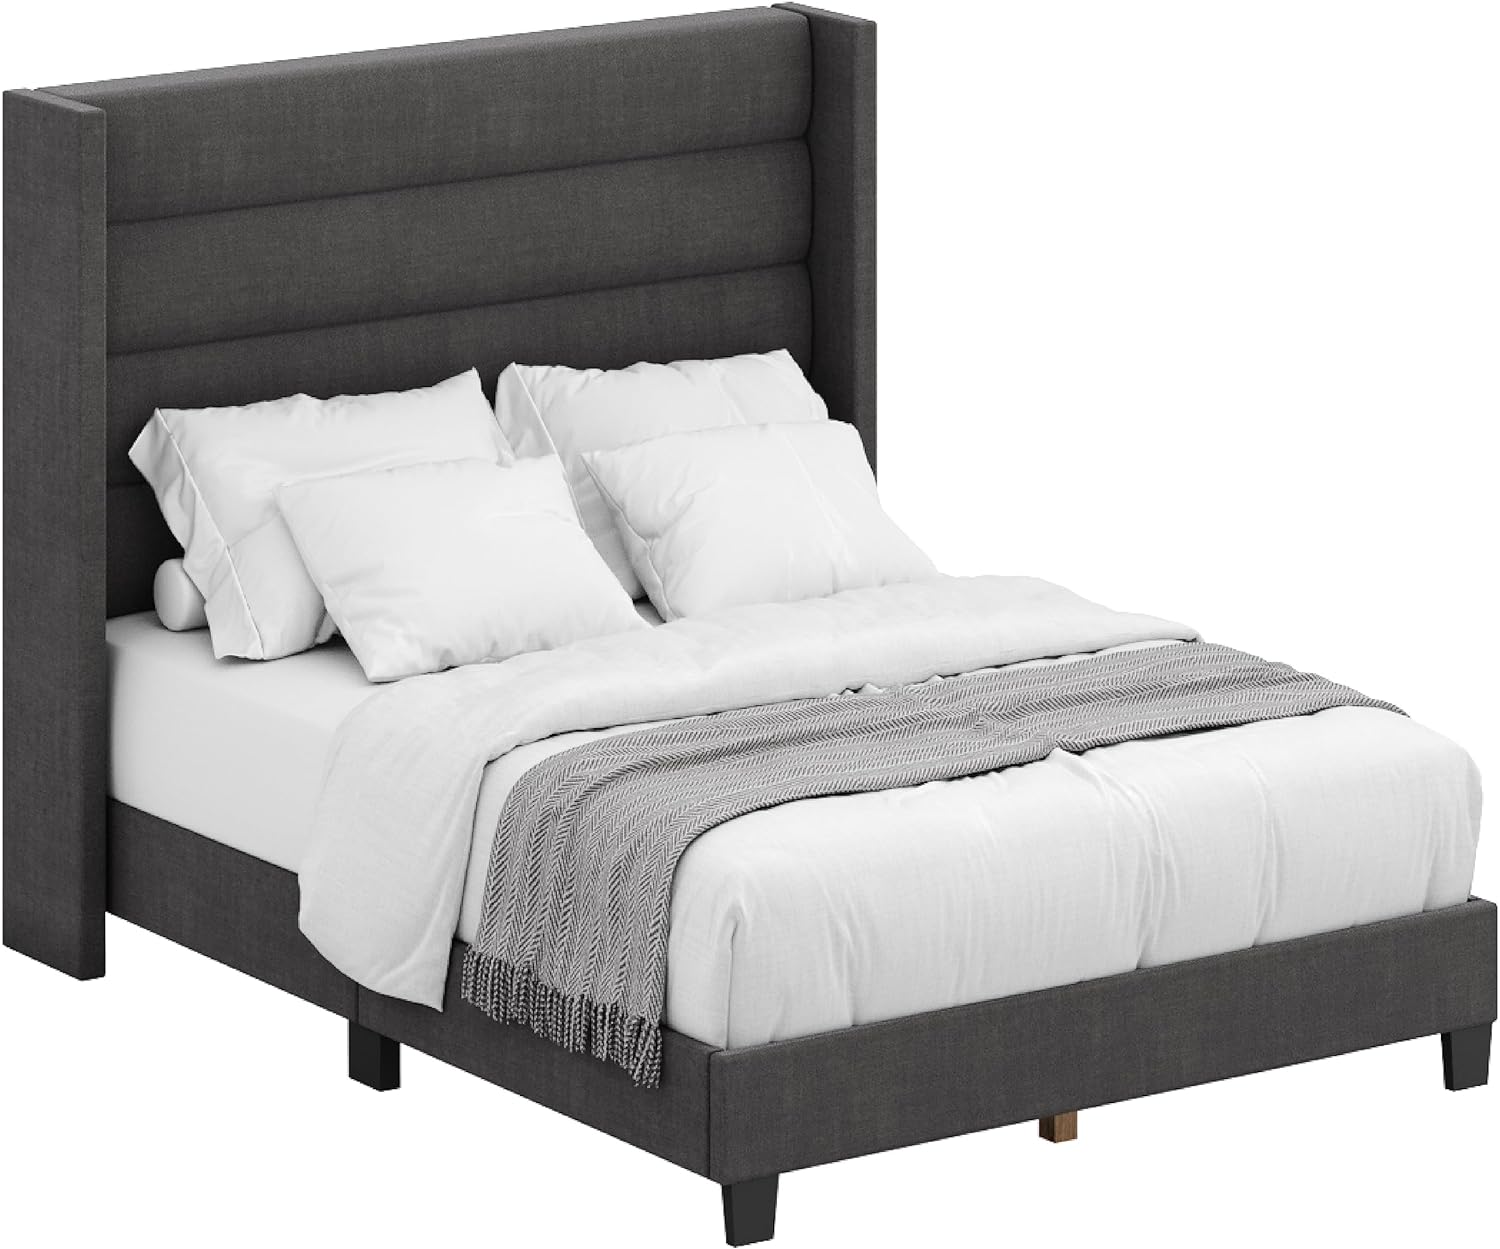 DG Casa George King Bed Frame - Charcoal Fabric Upholstered Panel Bed with Extra Tall Headboard - image 2 of 7